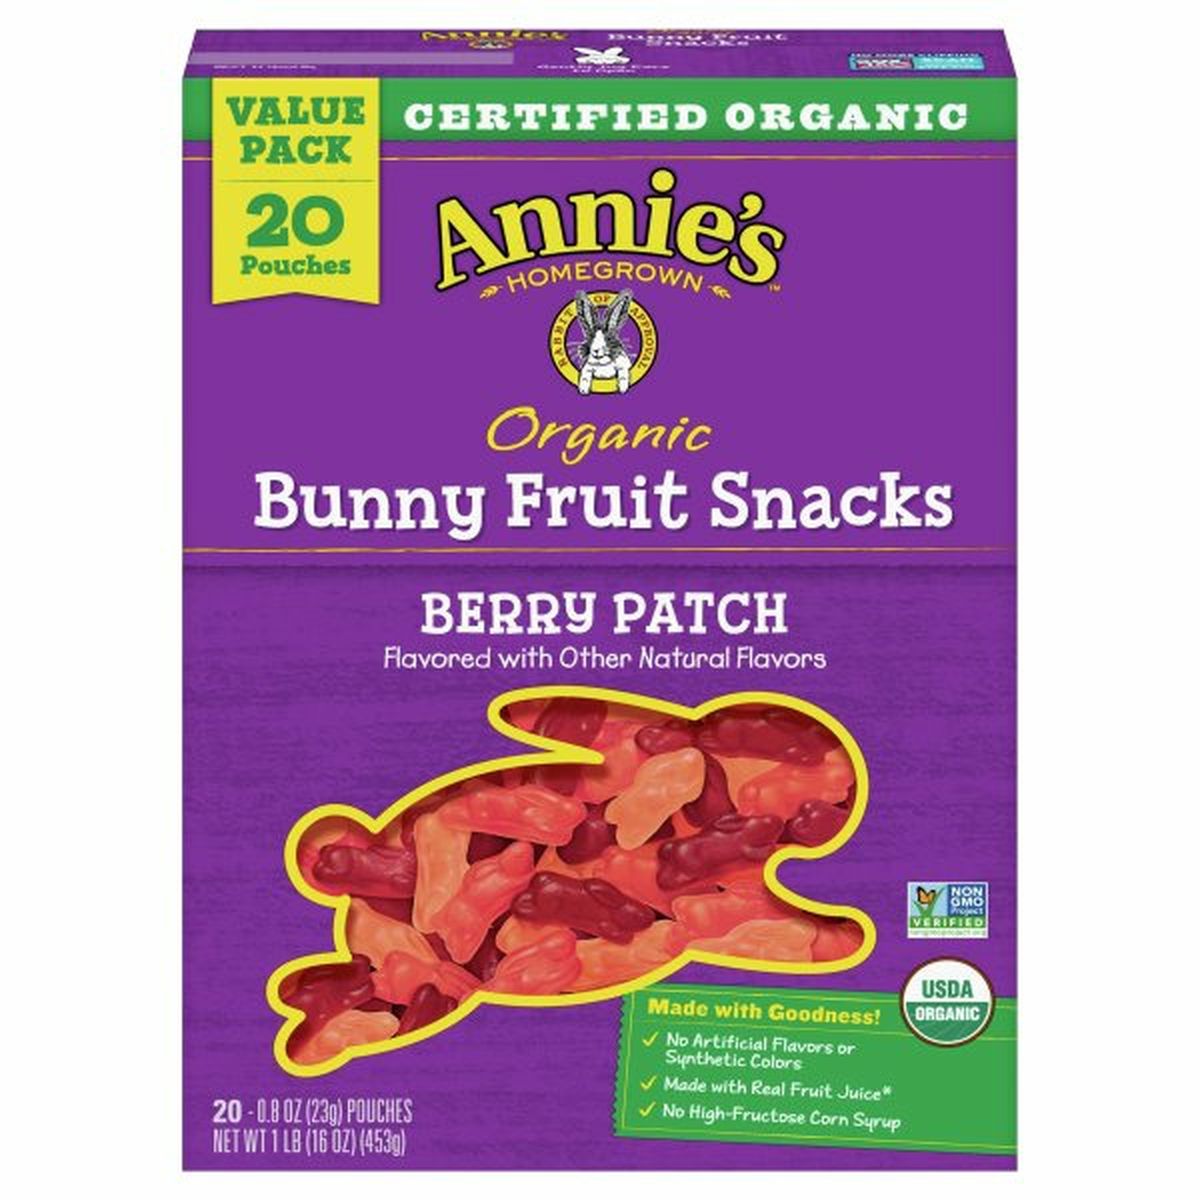 Calories in Annie's Homegrown Bunny Fruit Snacks, Organic, Berry Patch, Value Pack, 20 Pack